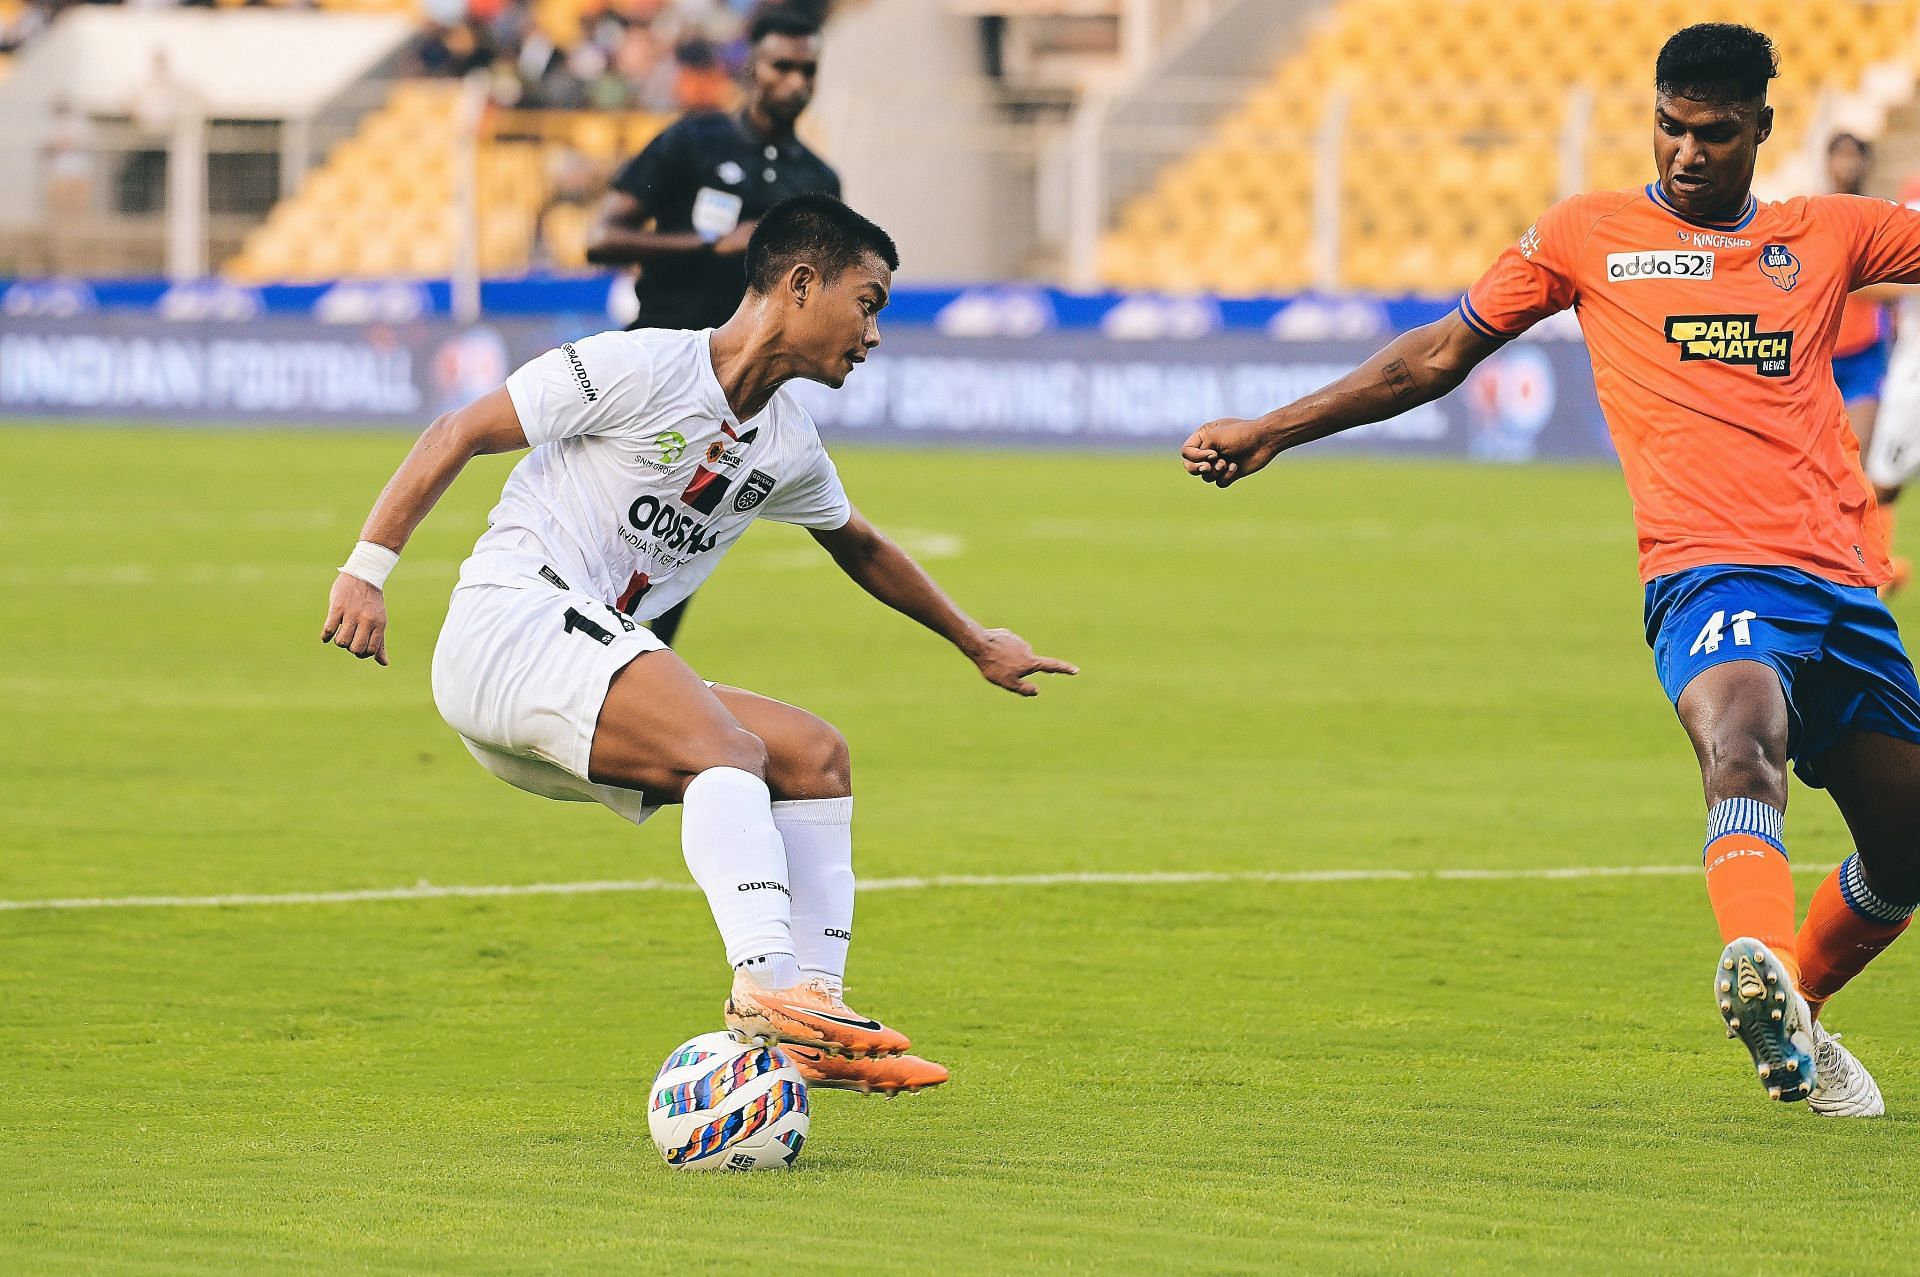 Odisha FC and FC Goa players vying for the ball.